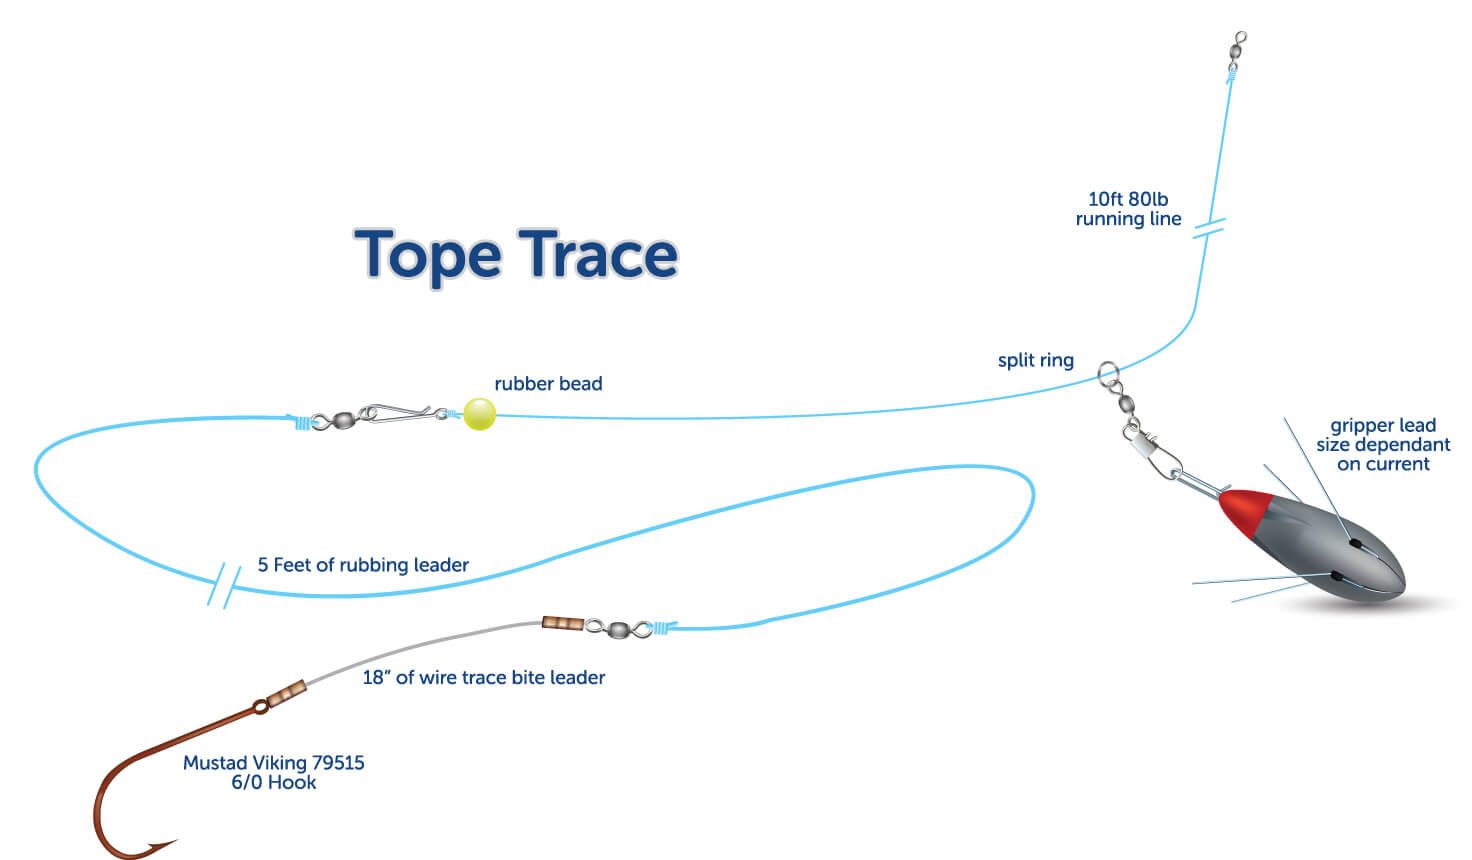 Tope Trace